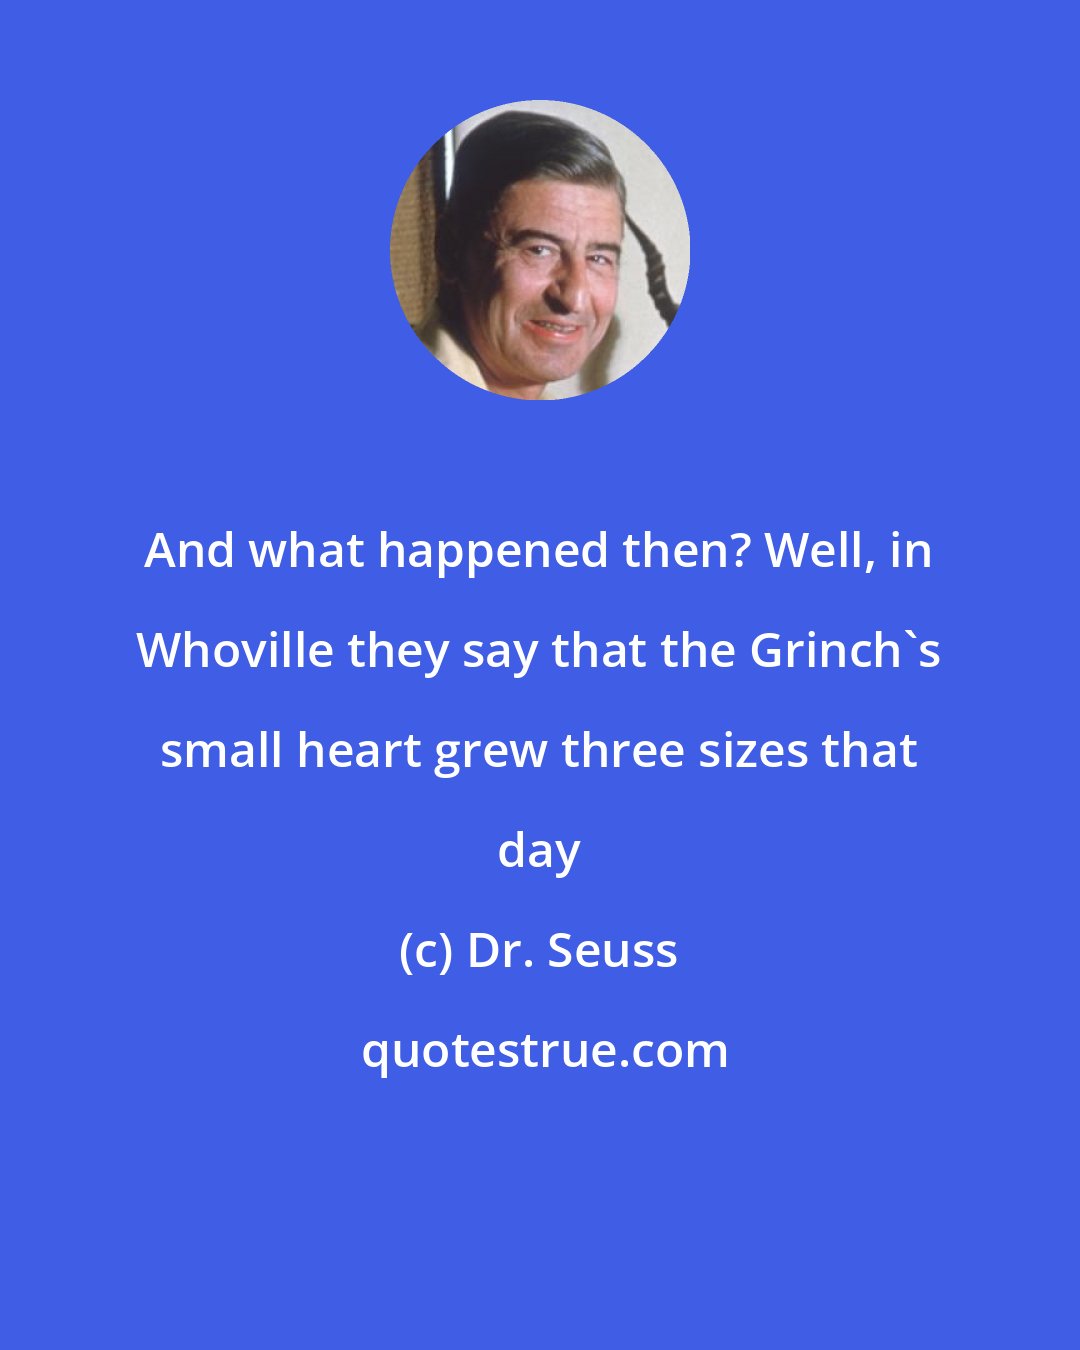 Dr. Seuss: And what happened then? Well, in Whoville they say that the Grinch's small heart grew three sizes that day